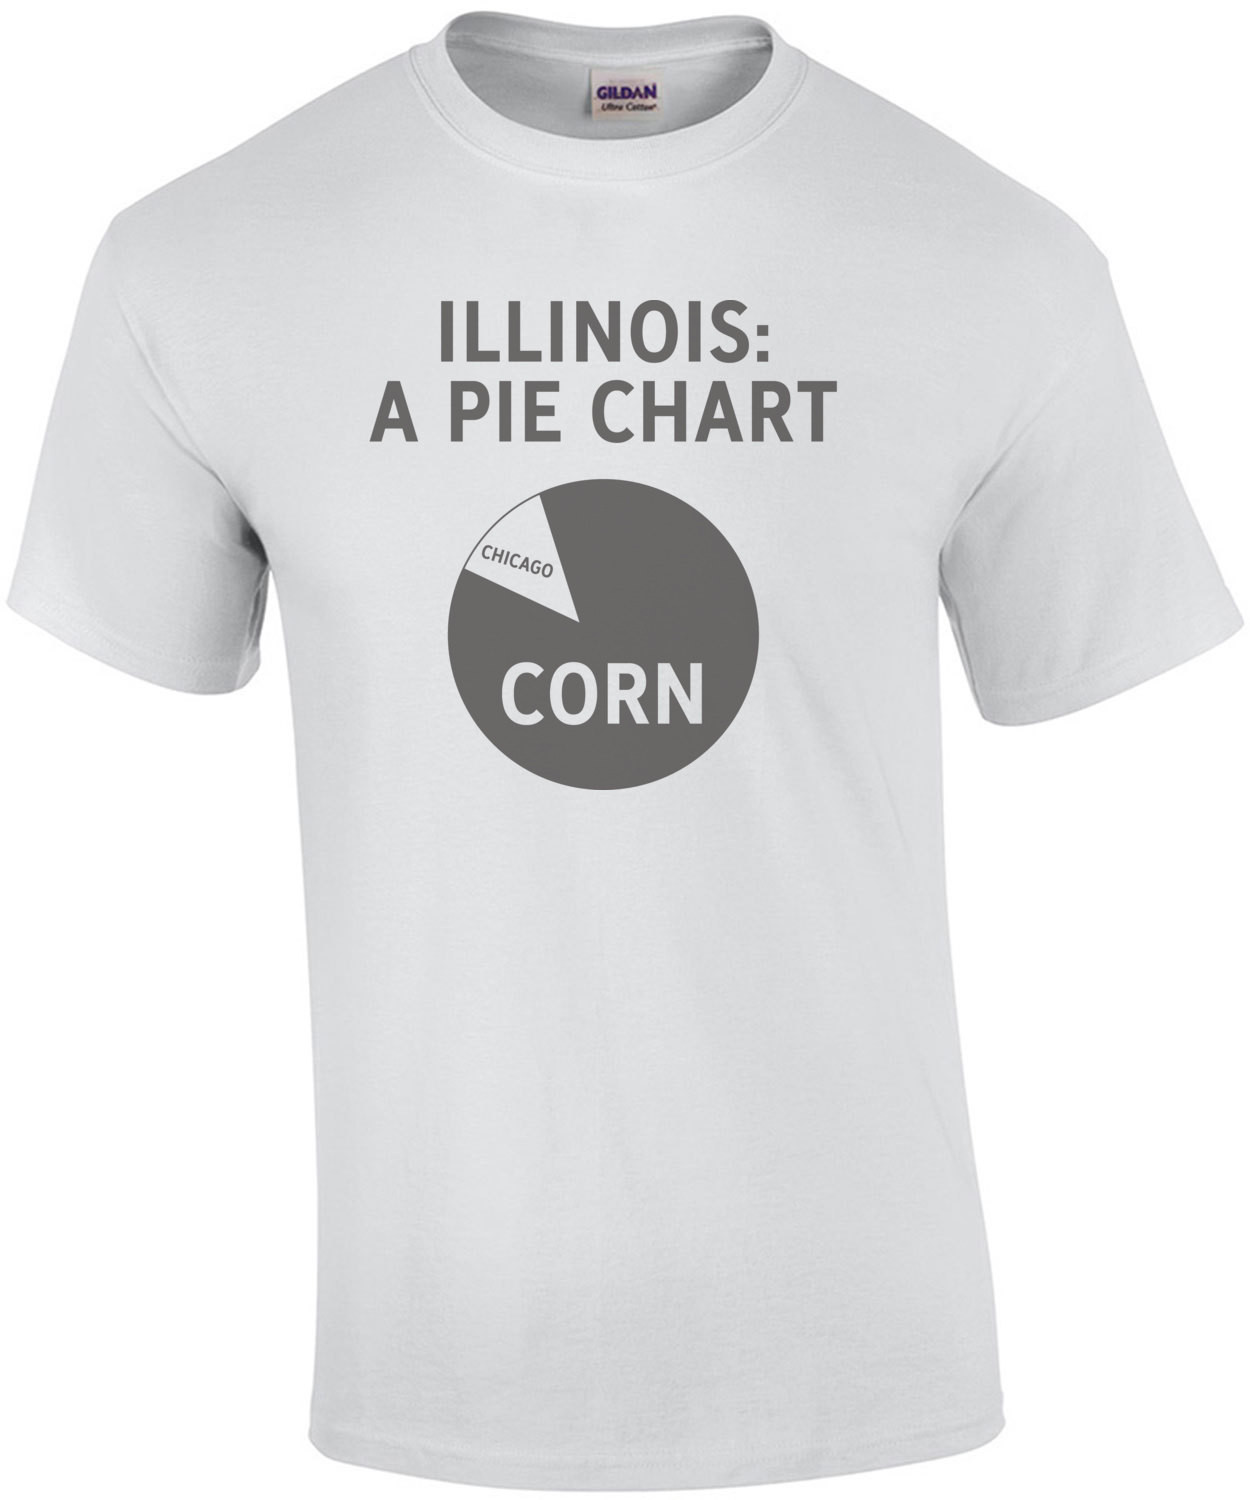 Illinois: A pie chart. Chicago and Corn - Illinois T-Shirt